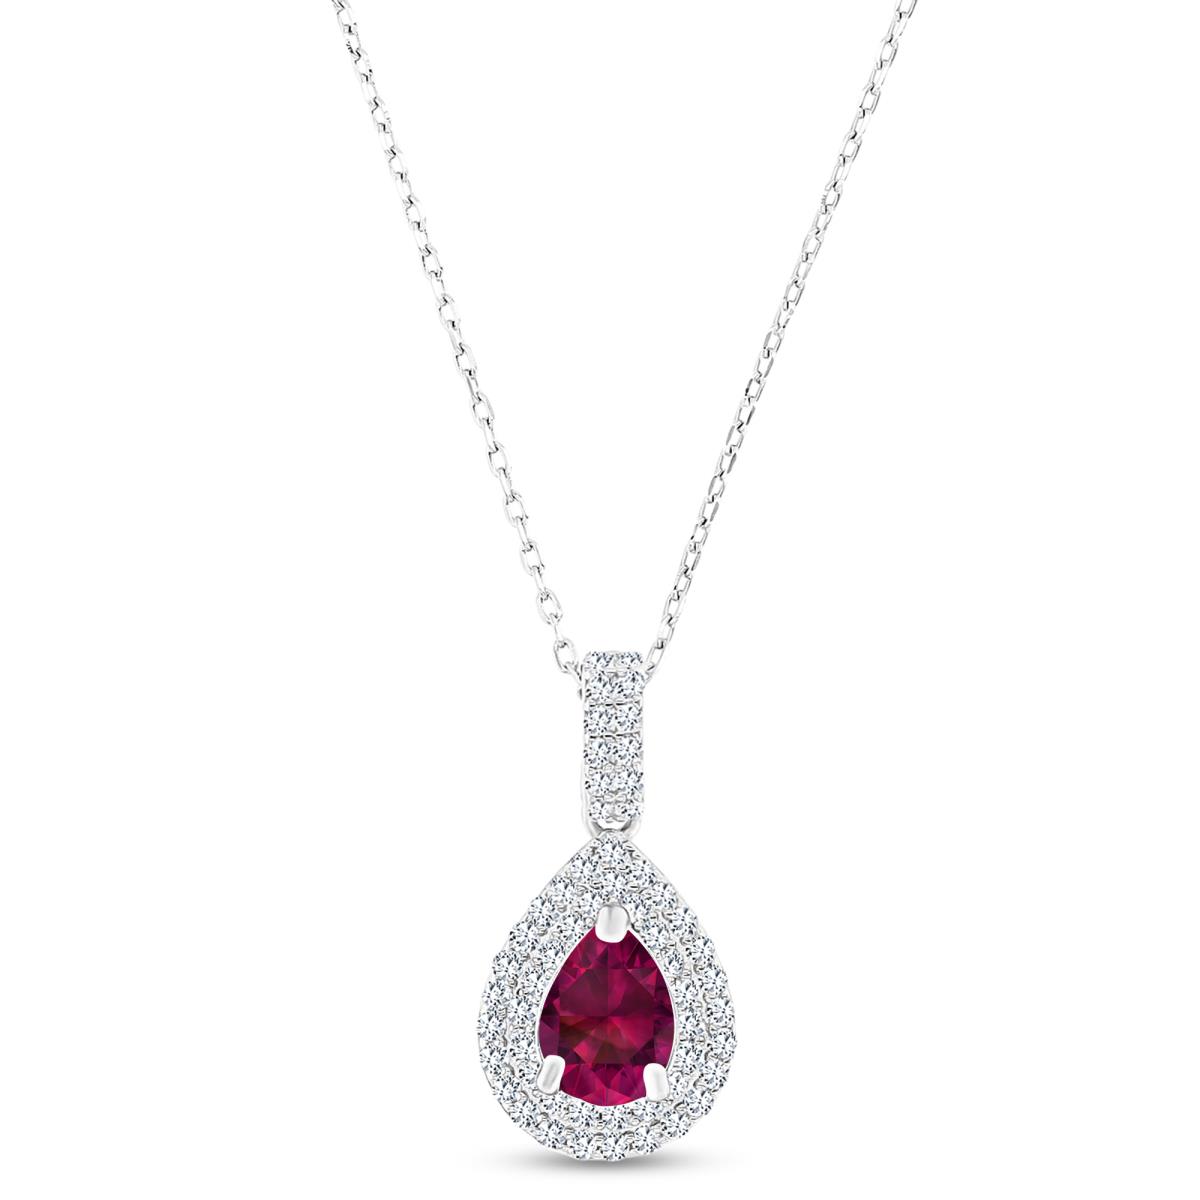 Sterling Silver Rhodium 8x6mm PS Cr Ruby/ Cr White Sapphire Double Halo 16"+2" Necklace